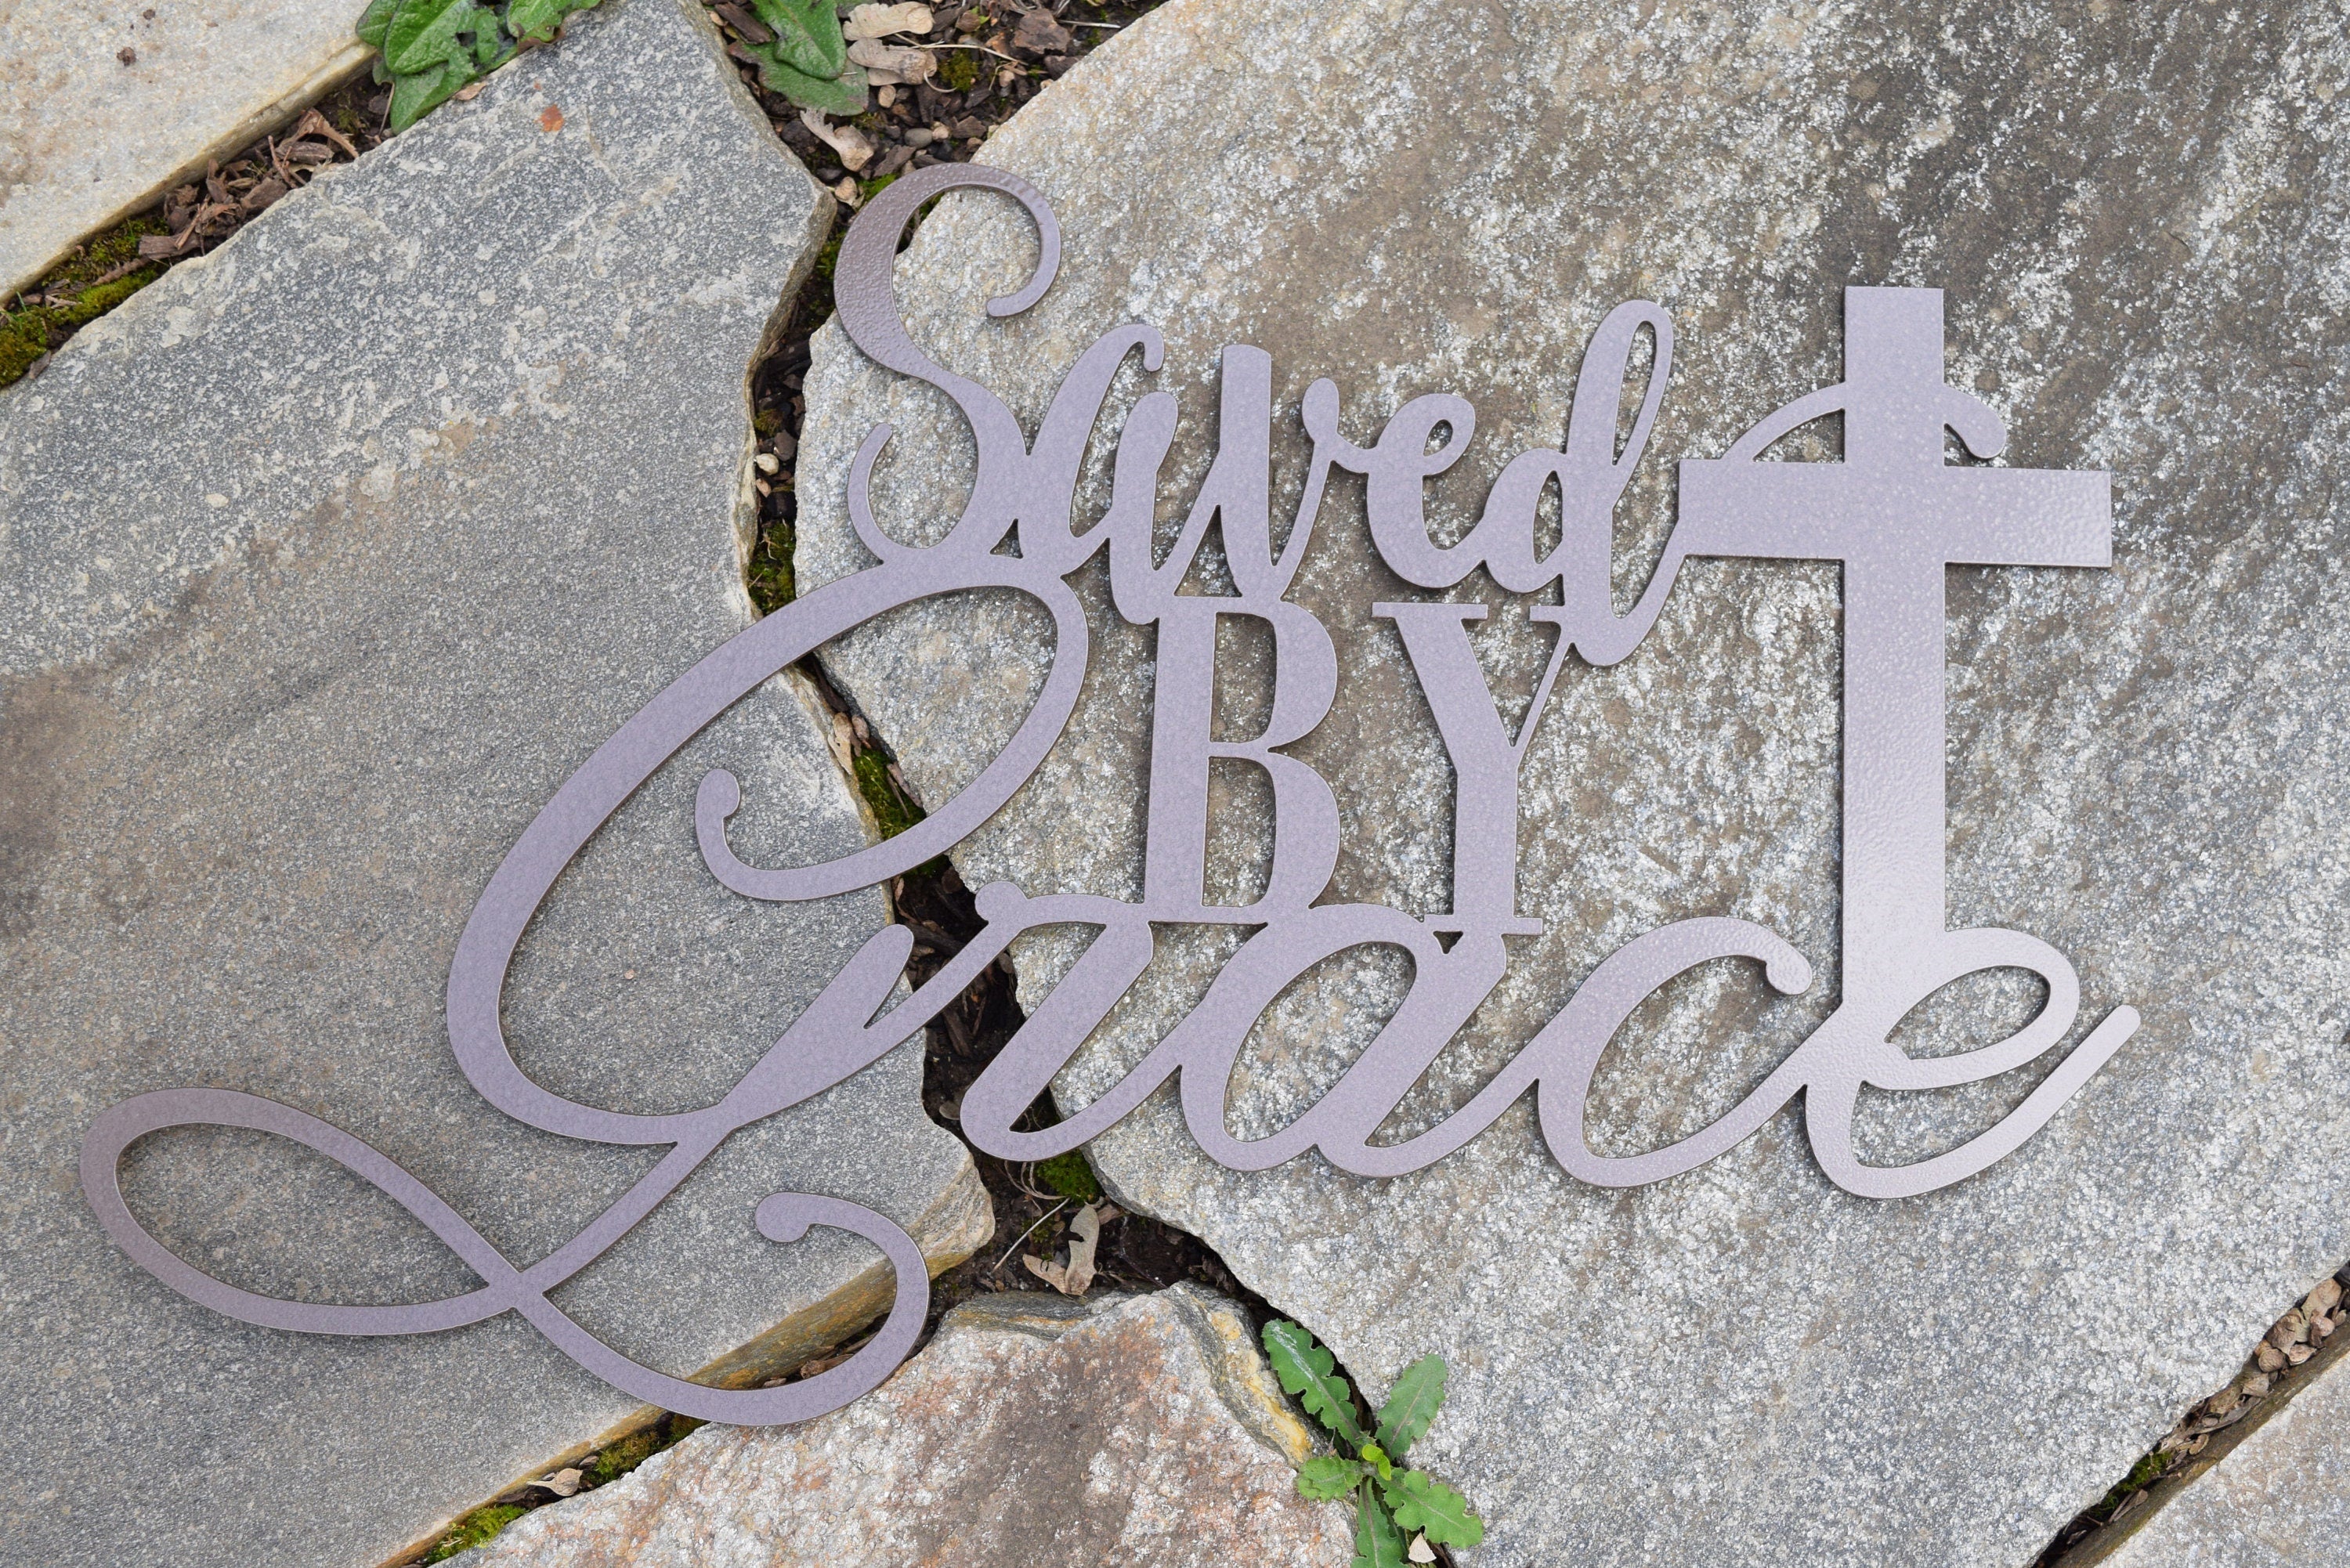 Saved By Grace Metal Sign